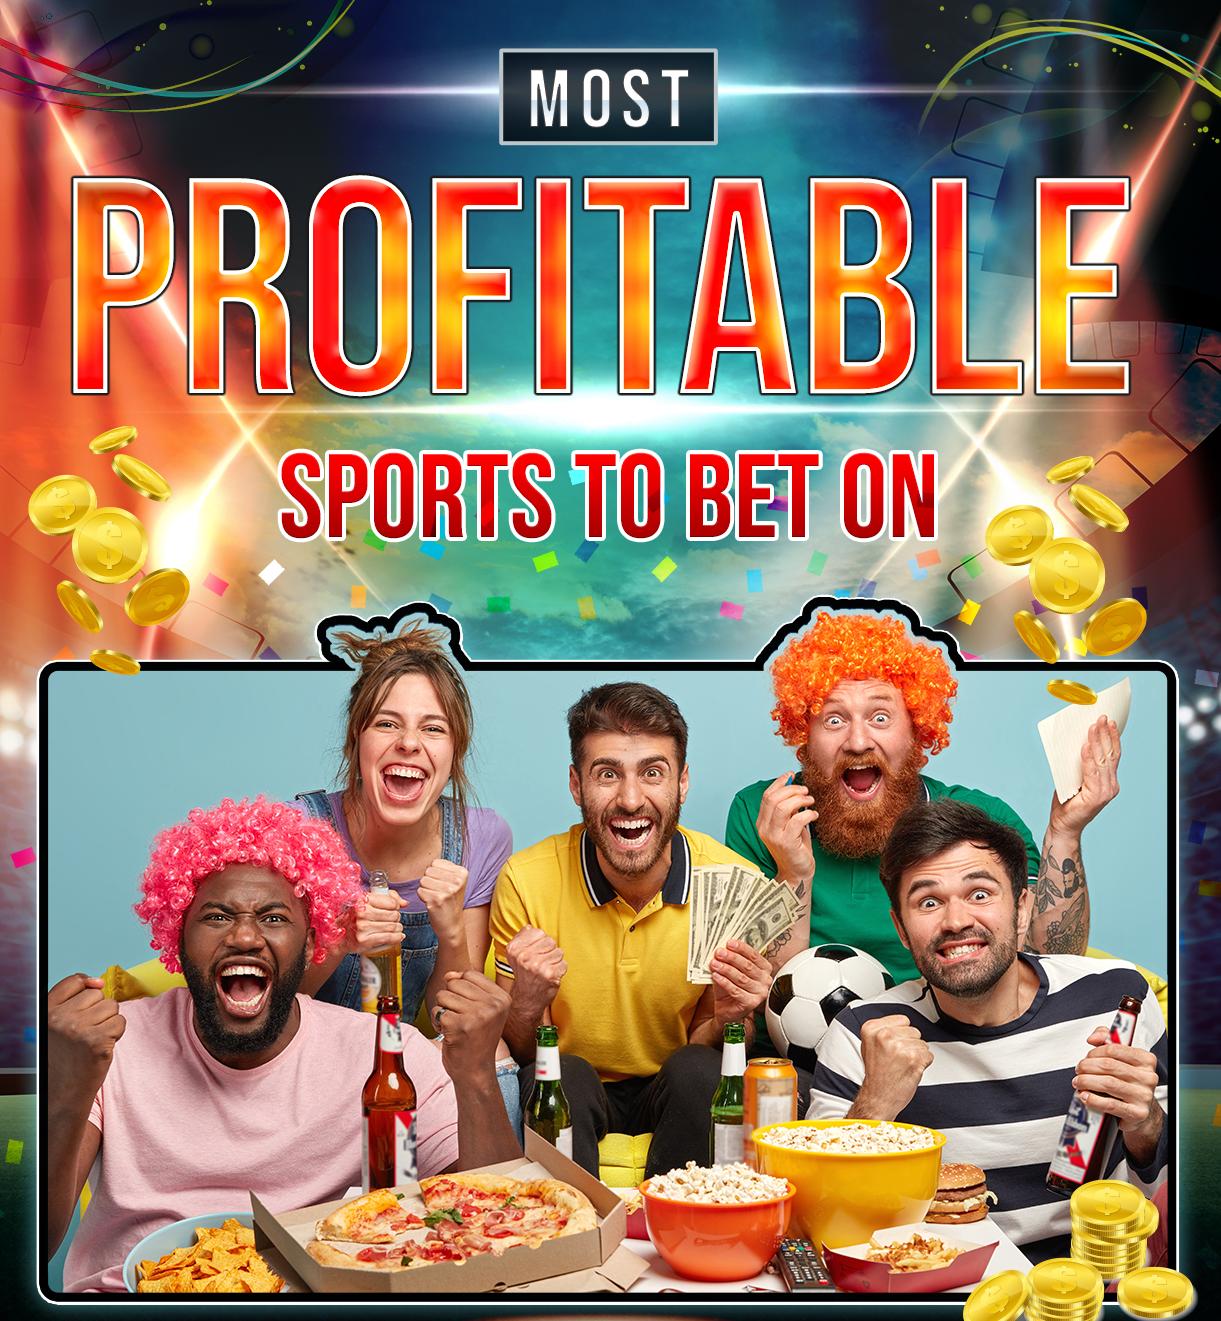 Most profitable sports to bet on